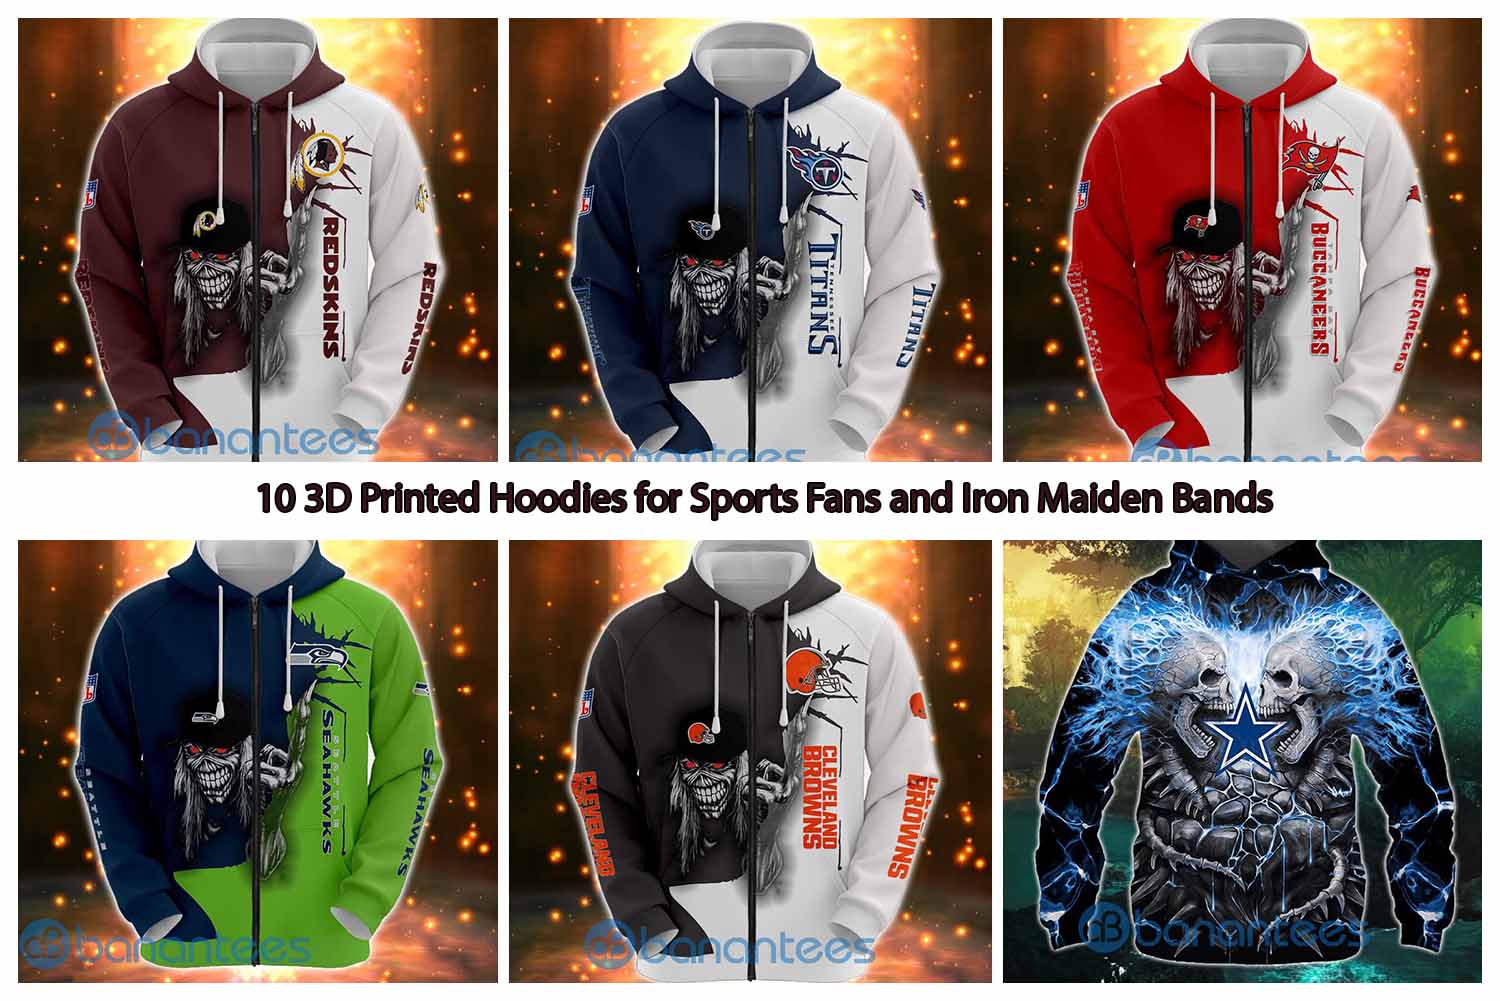 10 3D Printed Hoodies for Sports Fans and Iron Maiden Bands